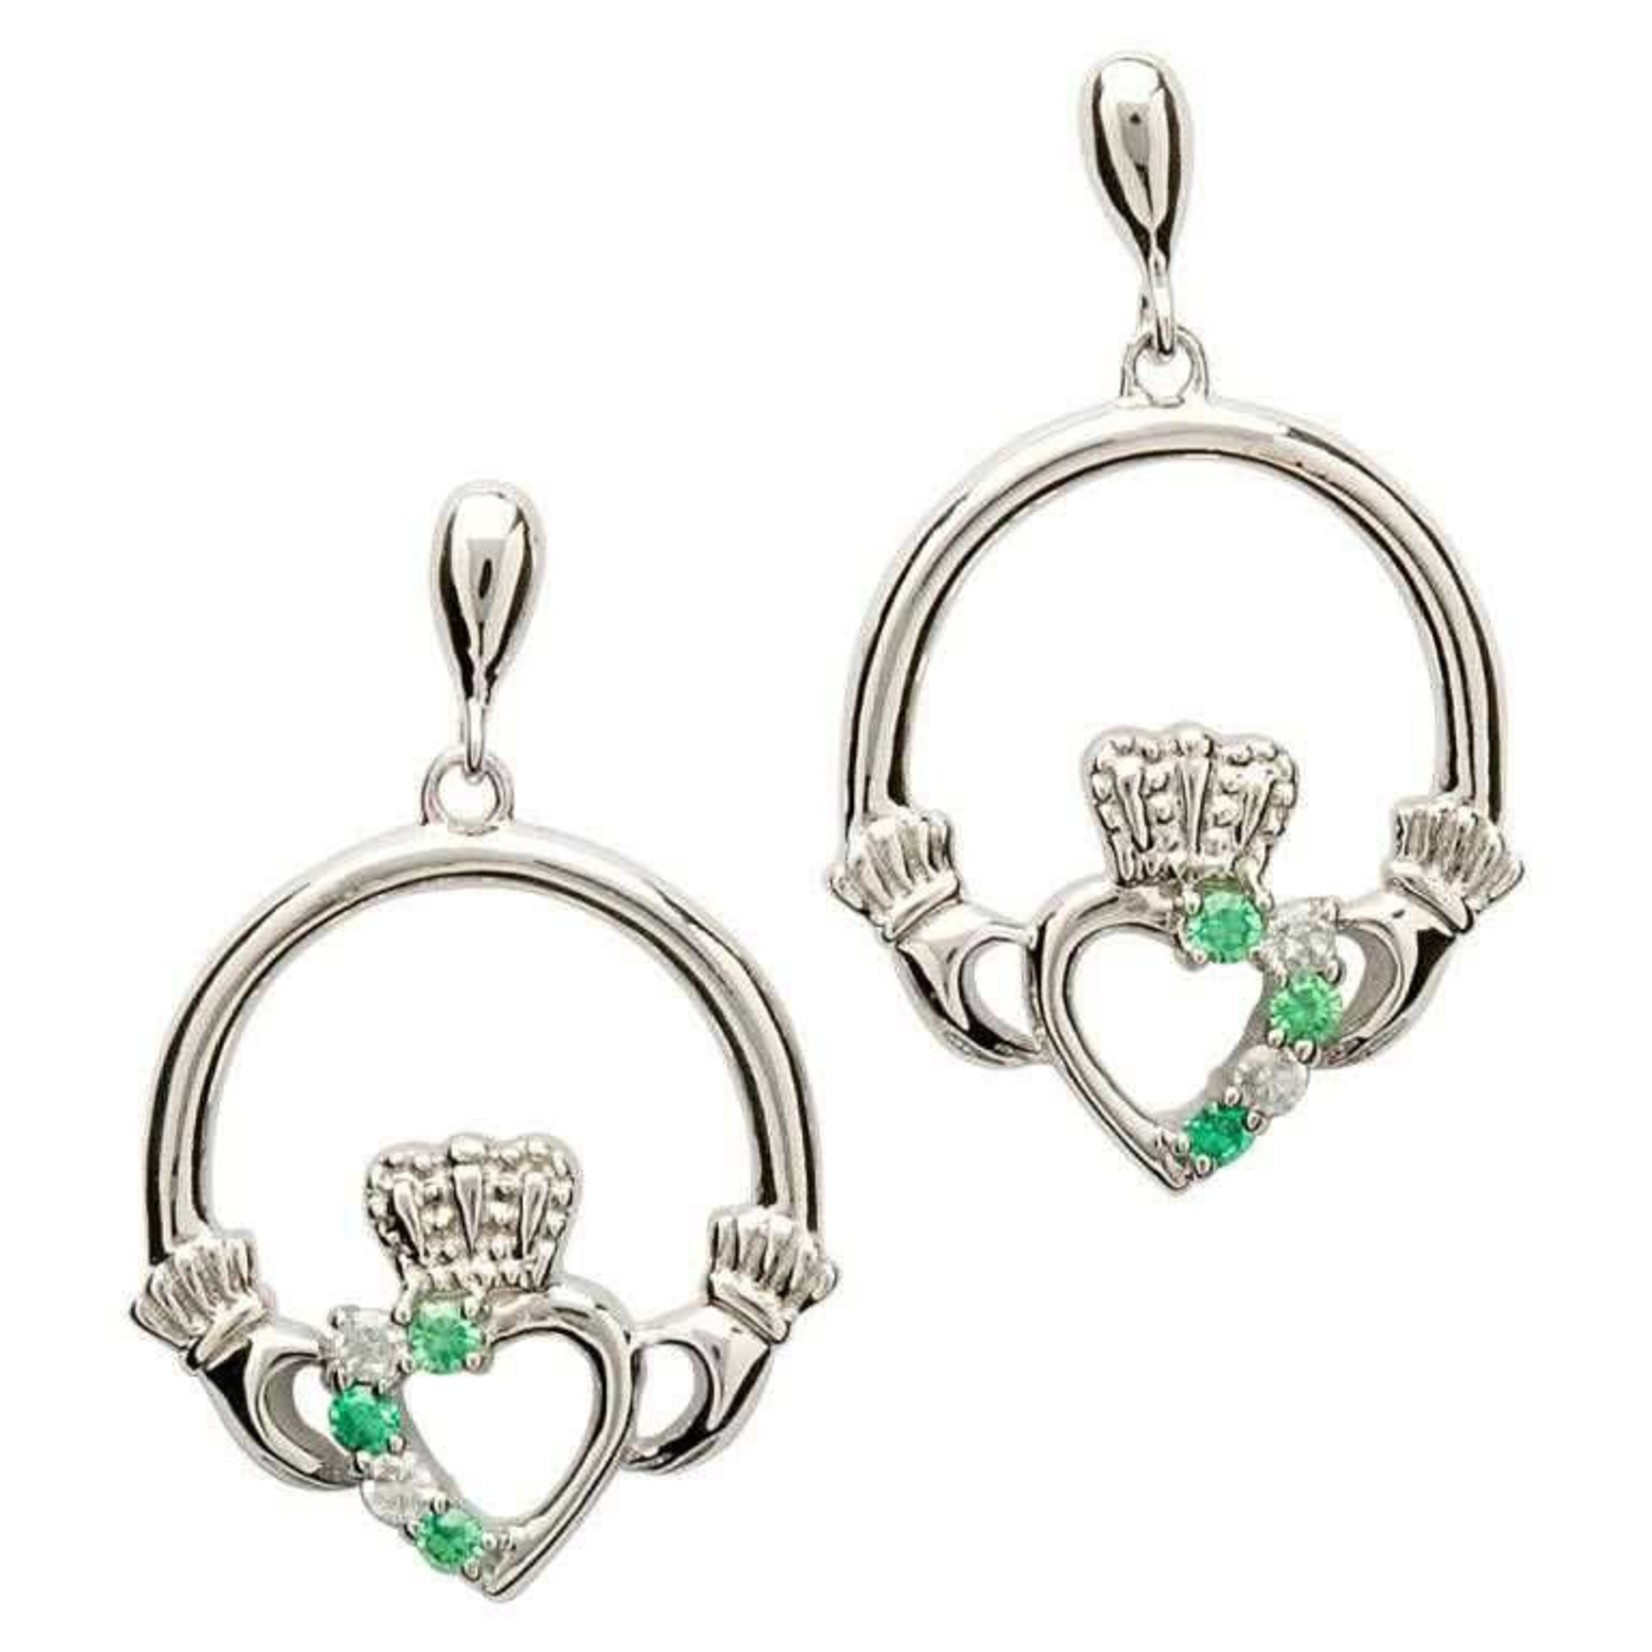 Shanore S/S Green Claddagh Earrings